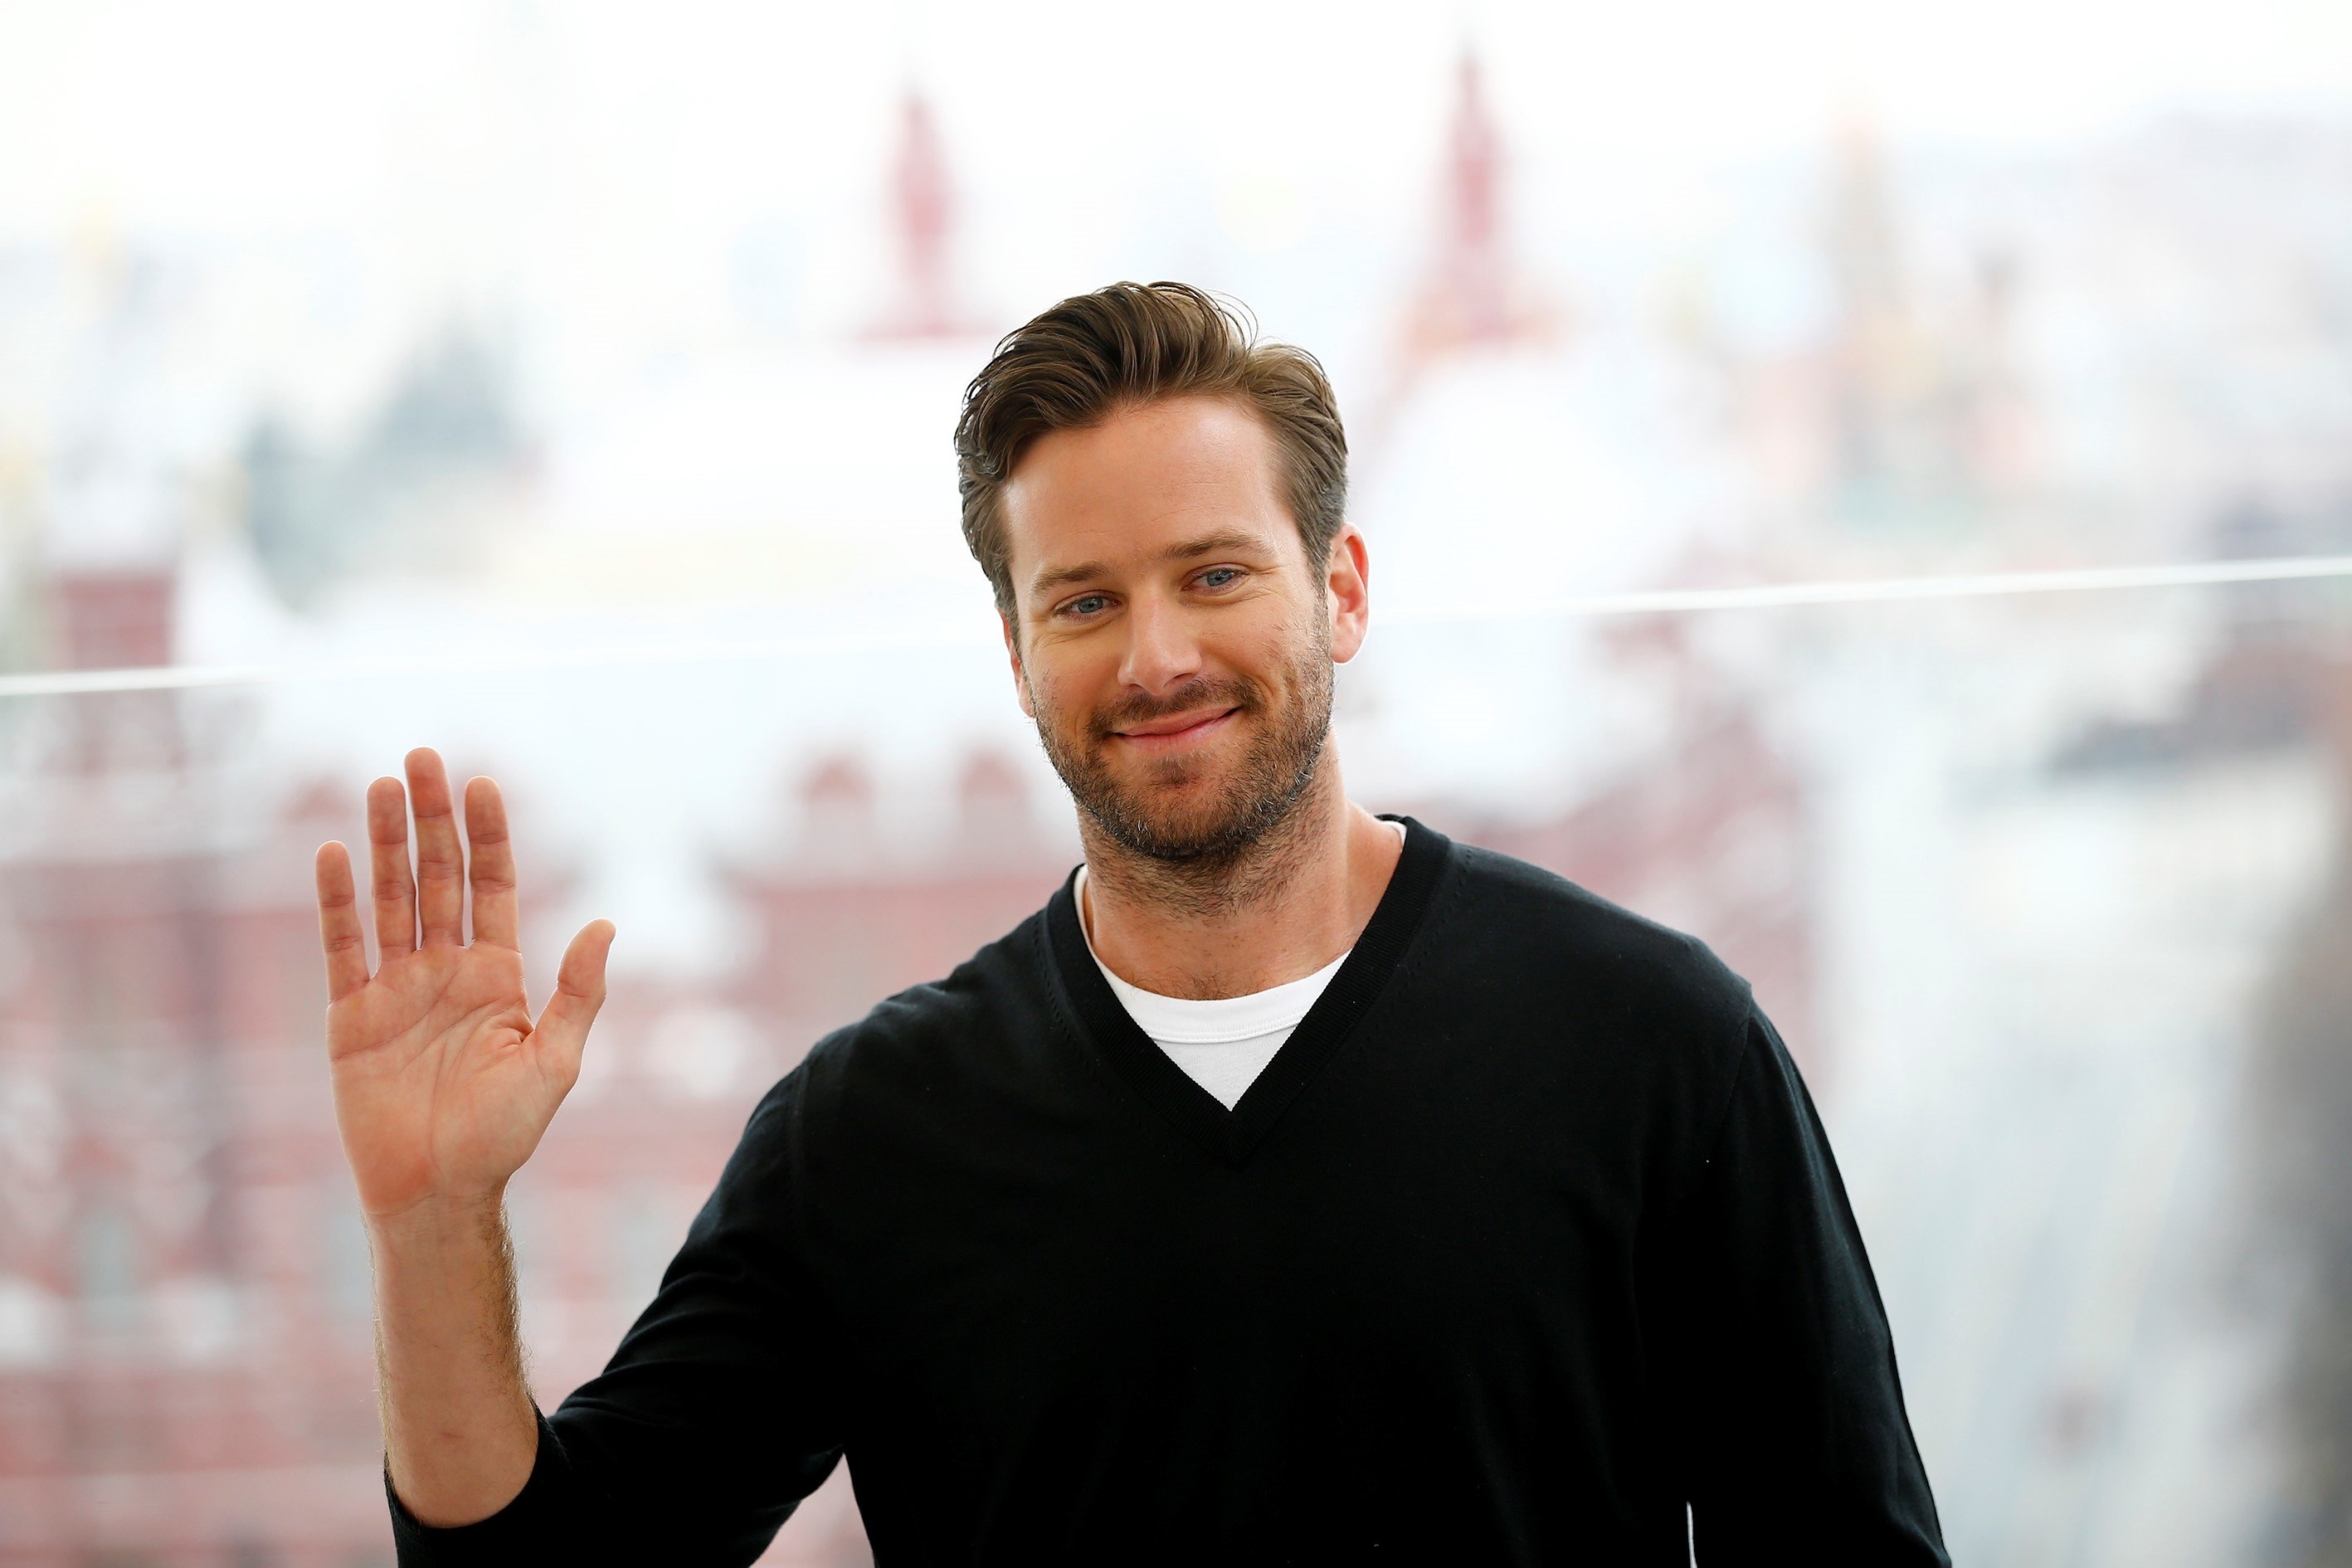 Armie with his hand raised